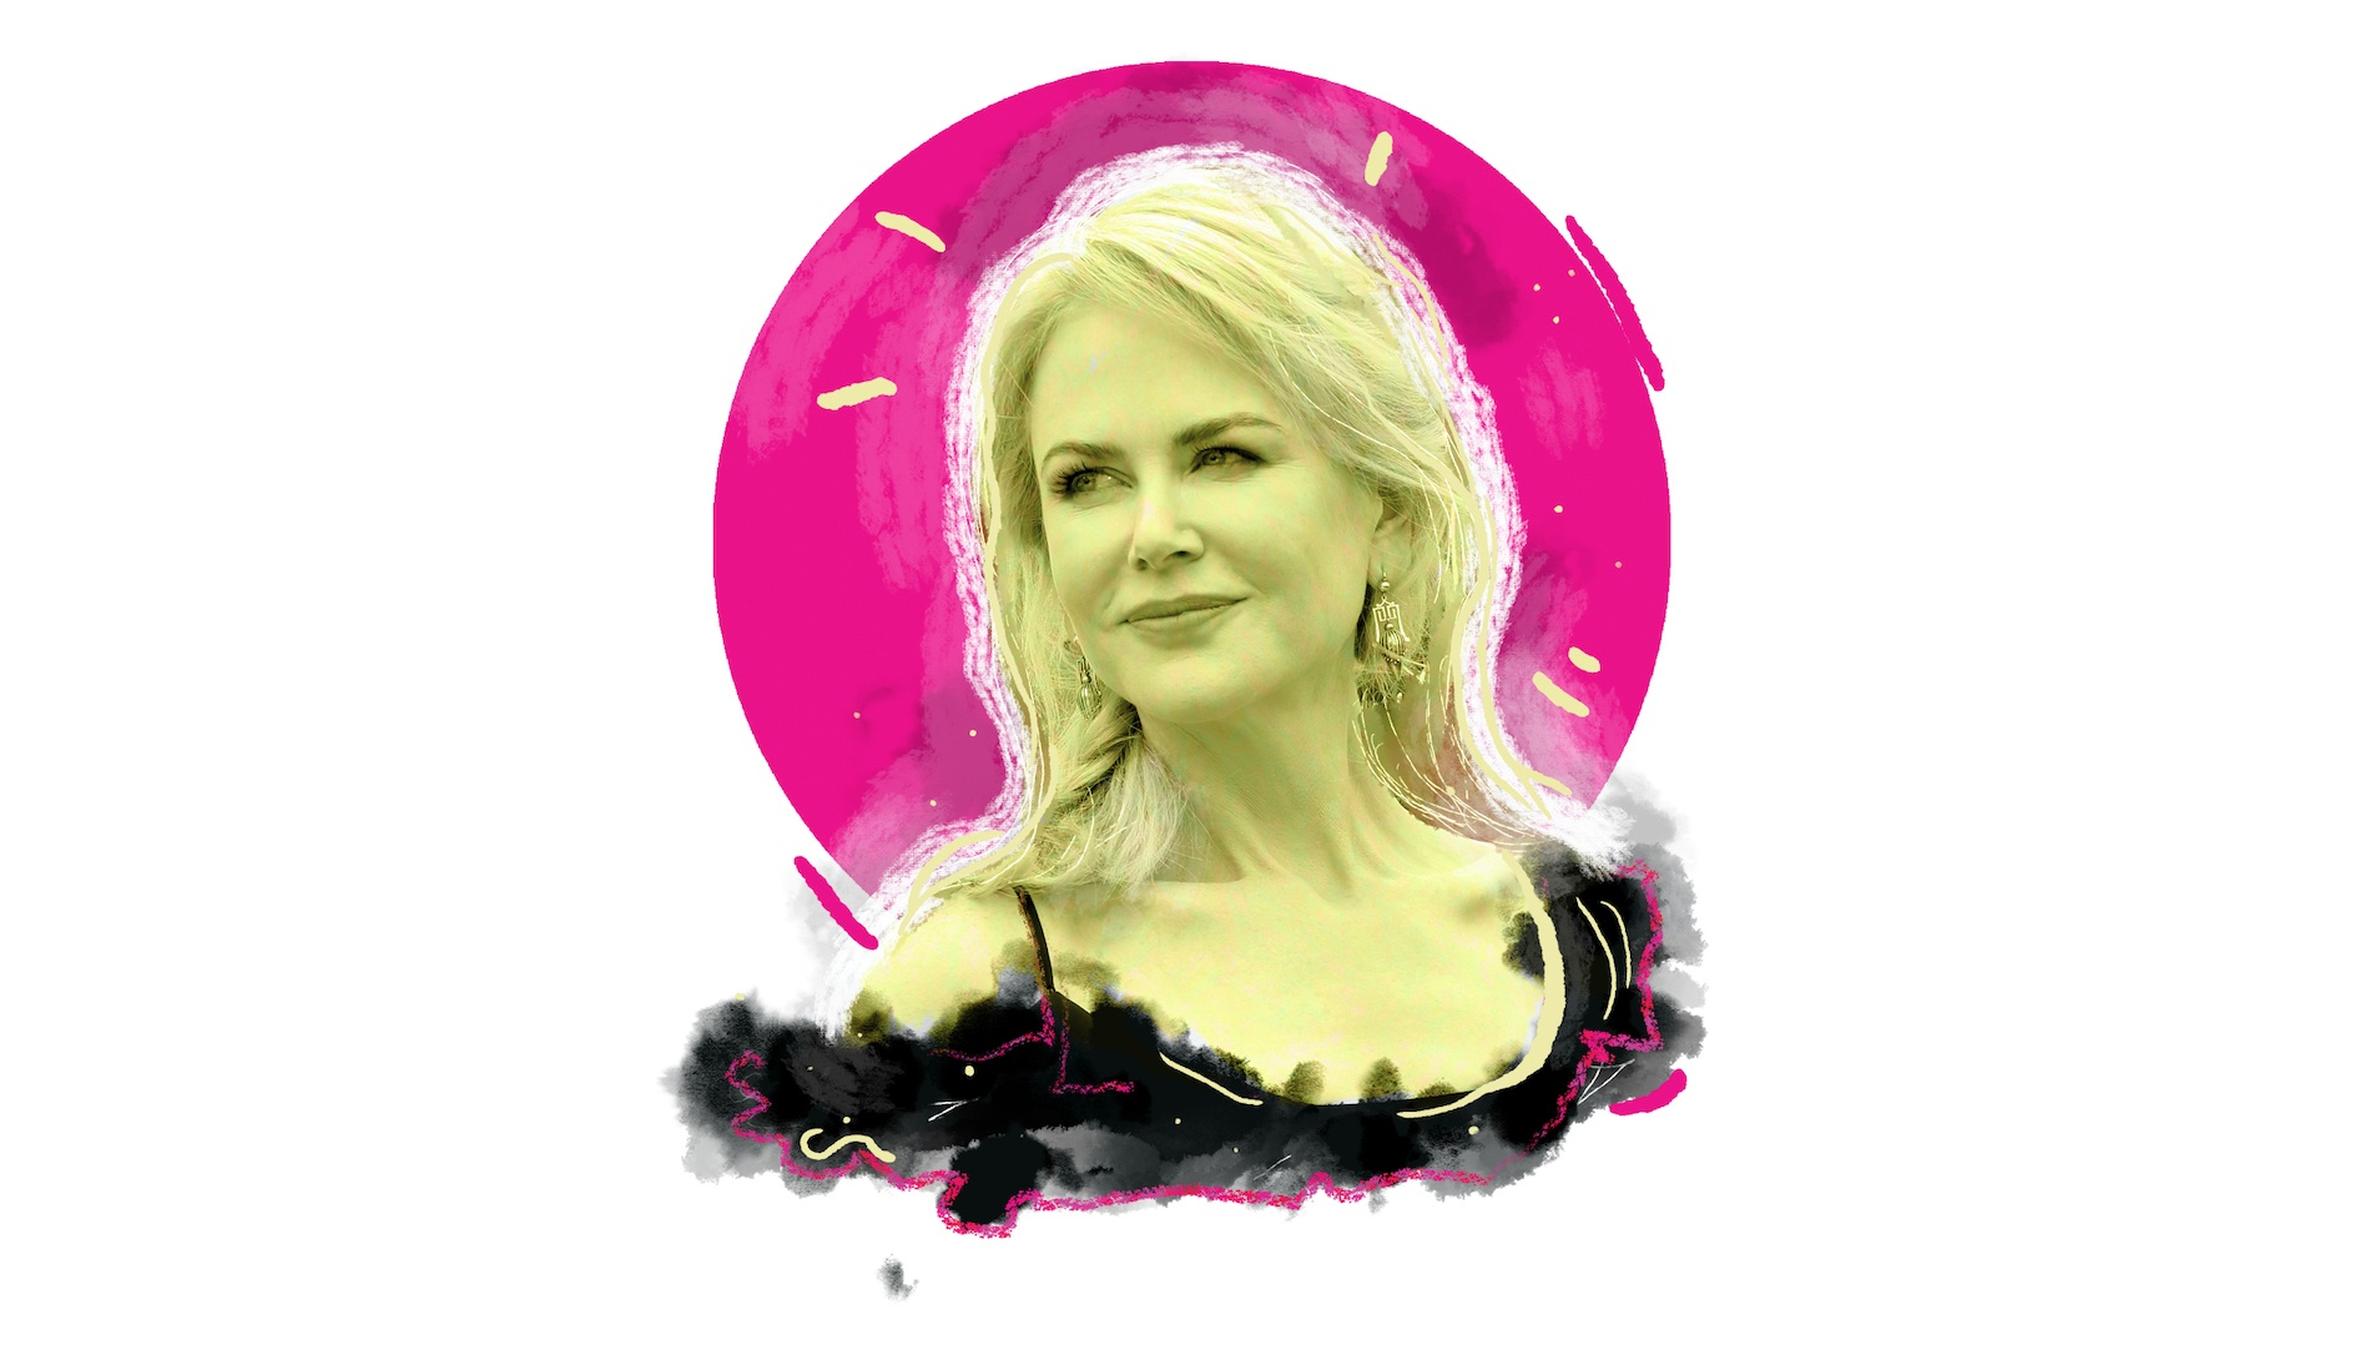 Gretchen Carlson Porn Drawings - Nicole Kidman's Best Acting and Audition Advice